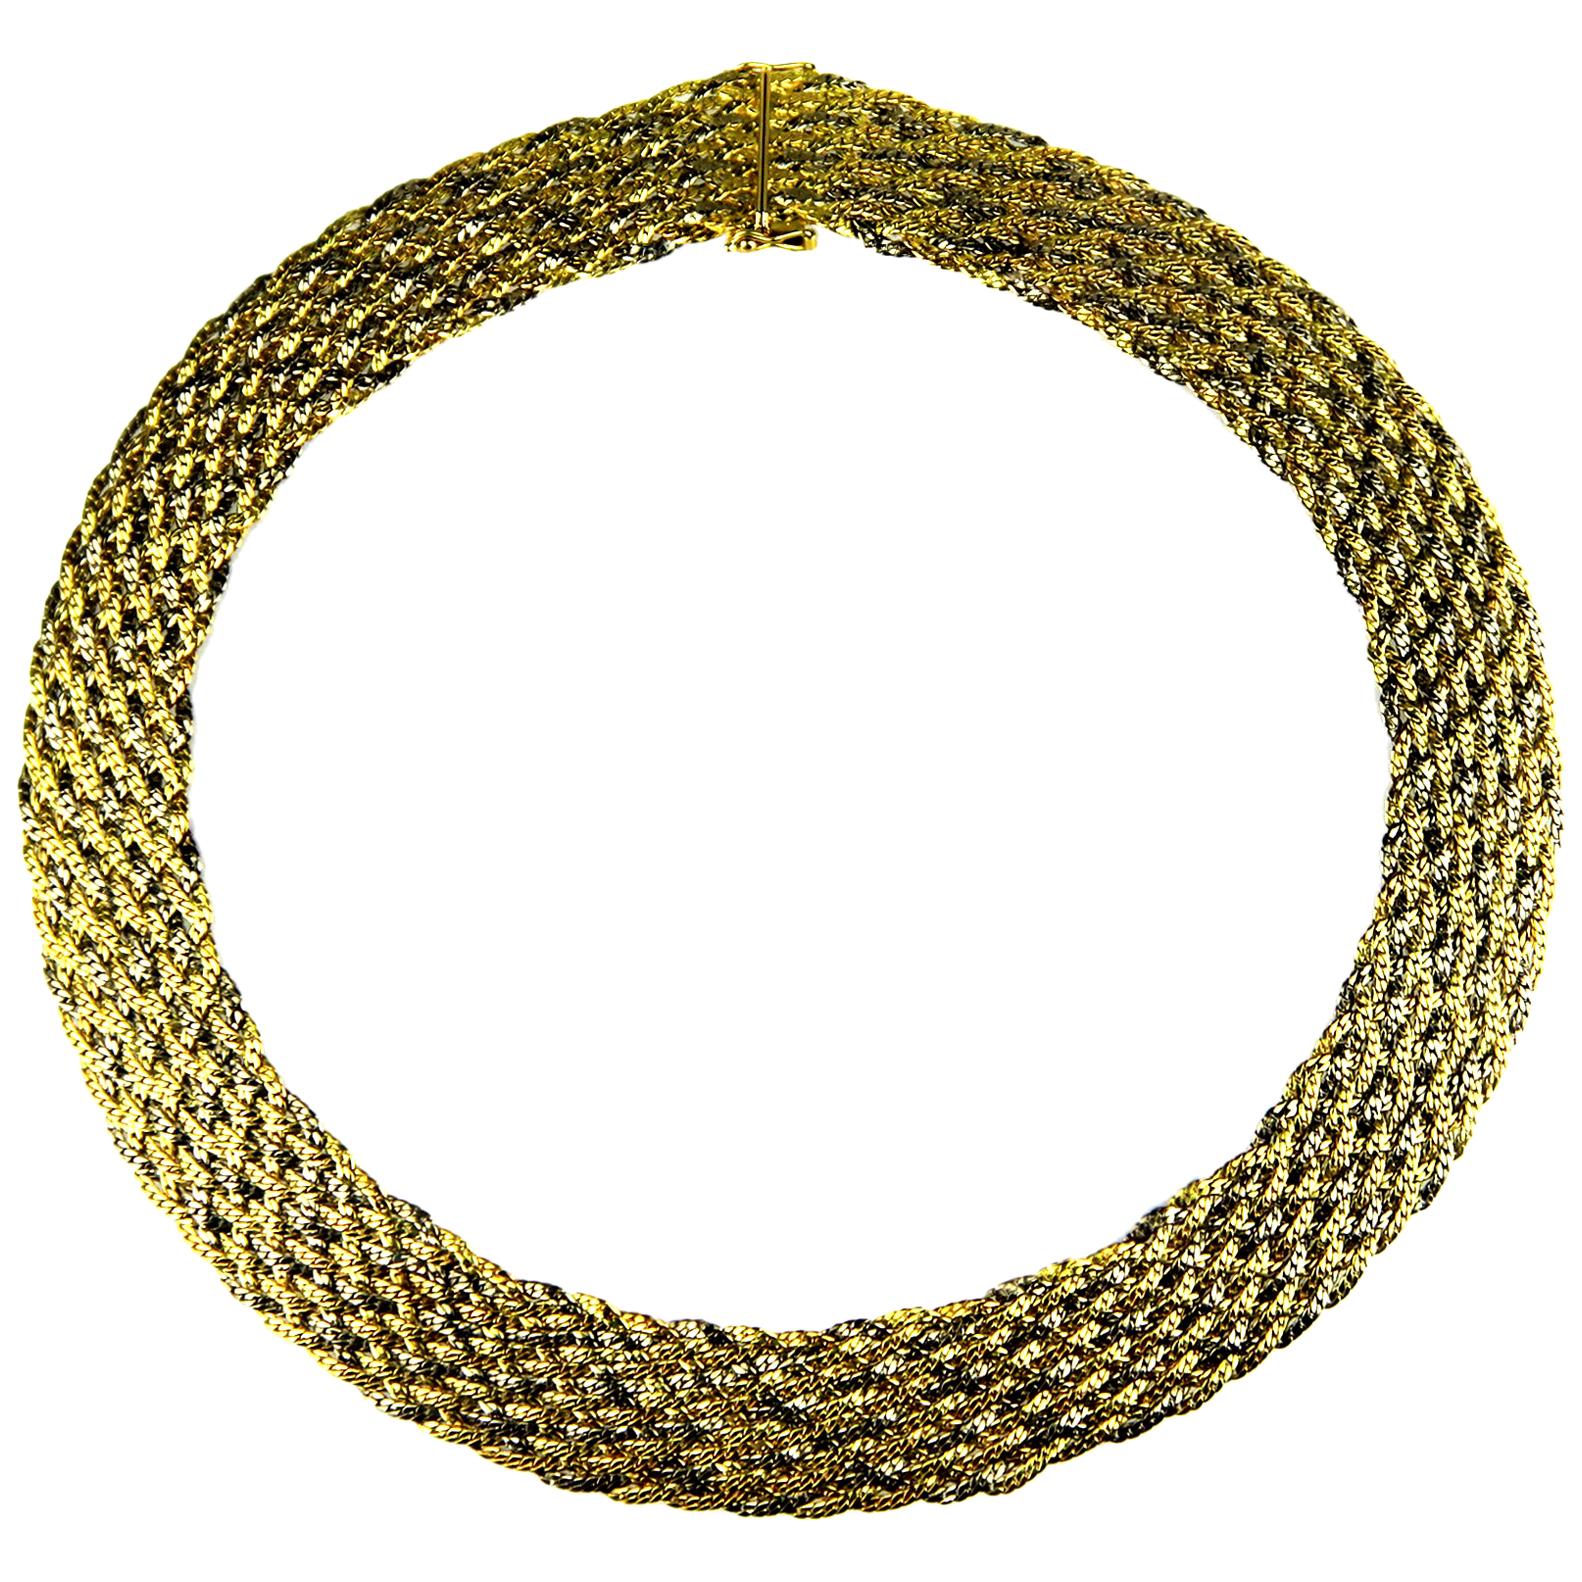 Vintage, Retro, Wide Flat Weave Necklace with Yellow, White, Rose Gold in 18K